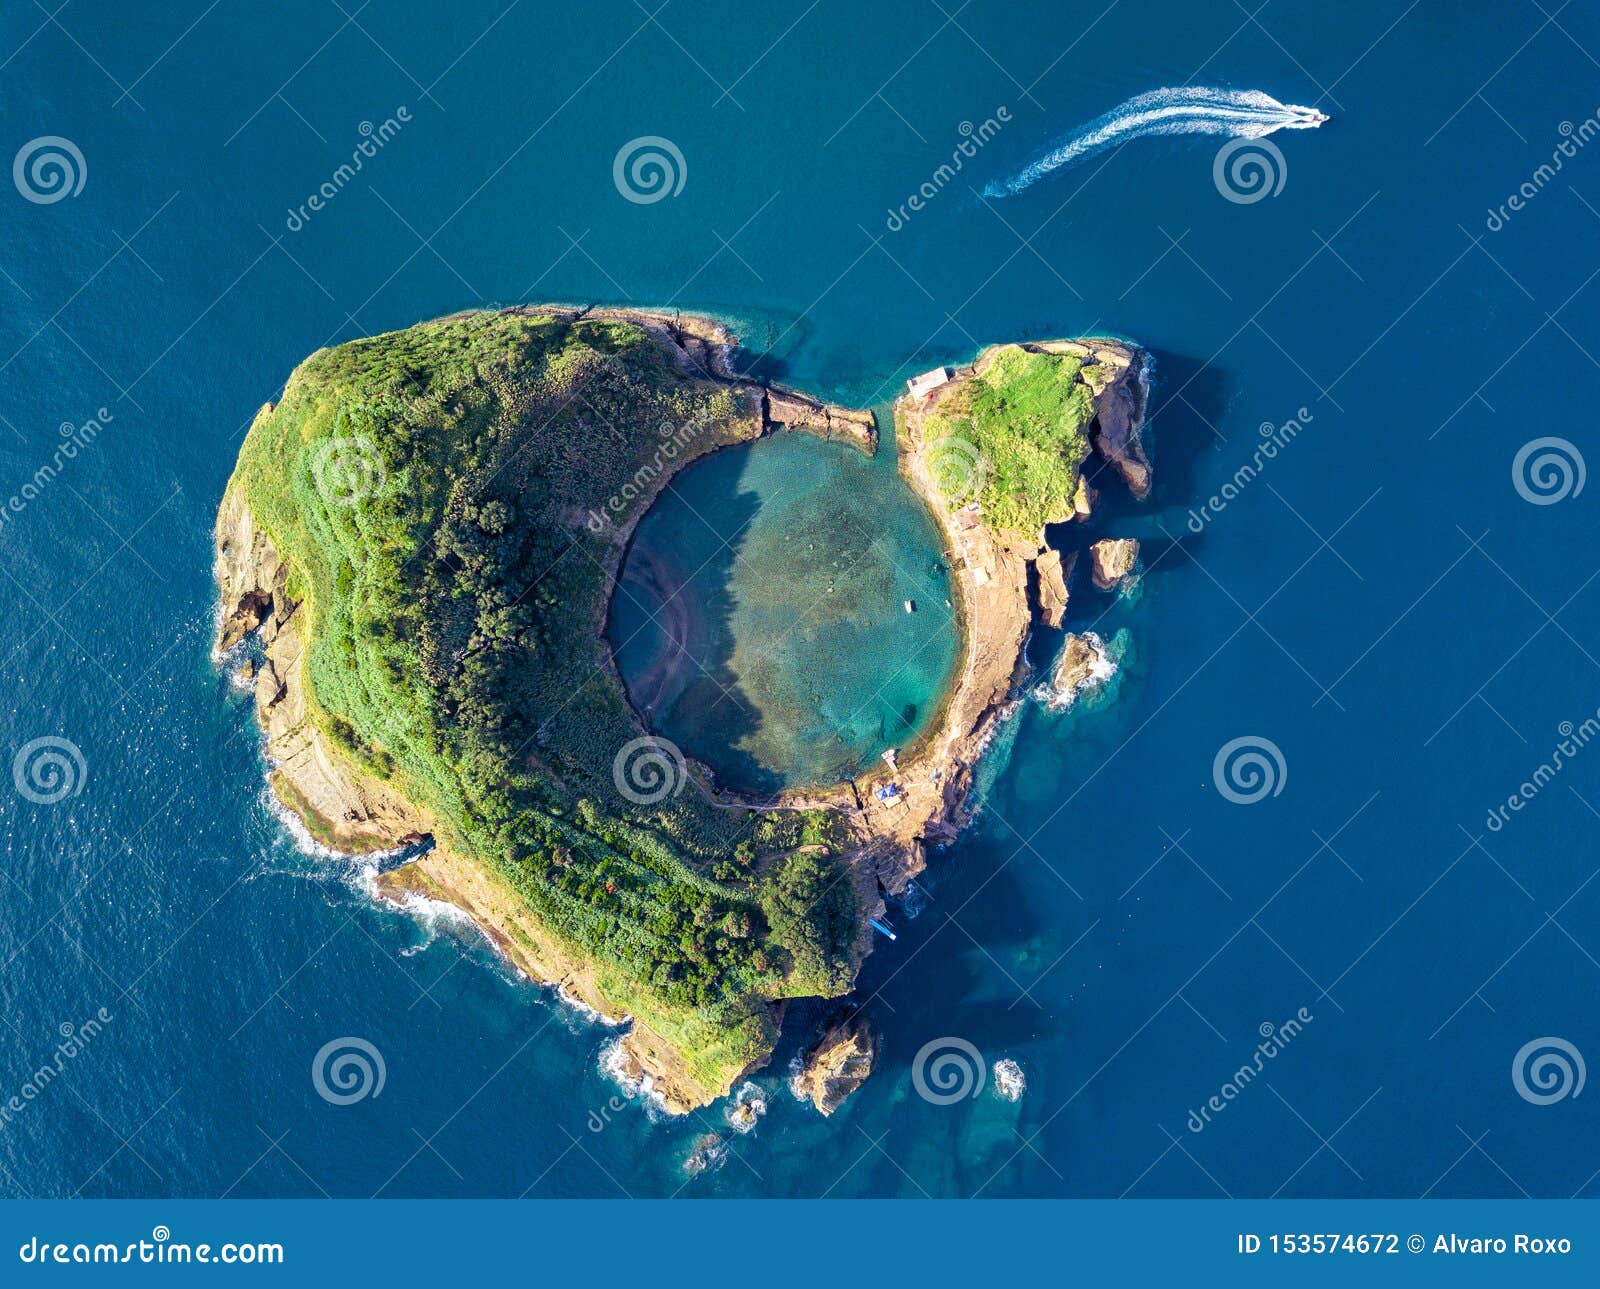 azores aerial panoramic view. top view of islet of vila franca do campo. crater of an old underwater volcano. san miguel island, a